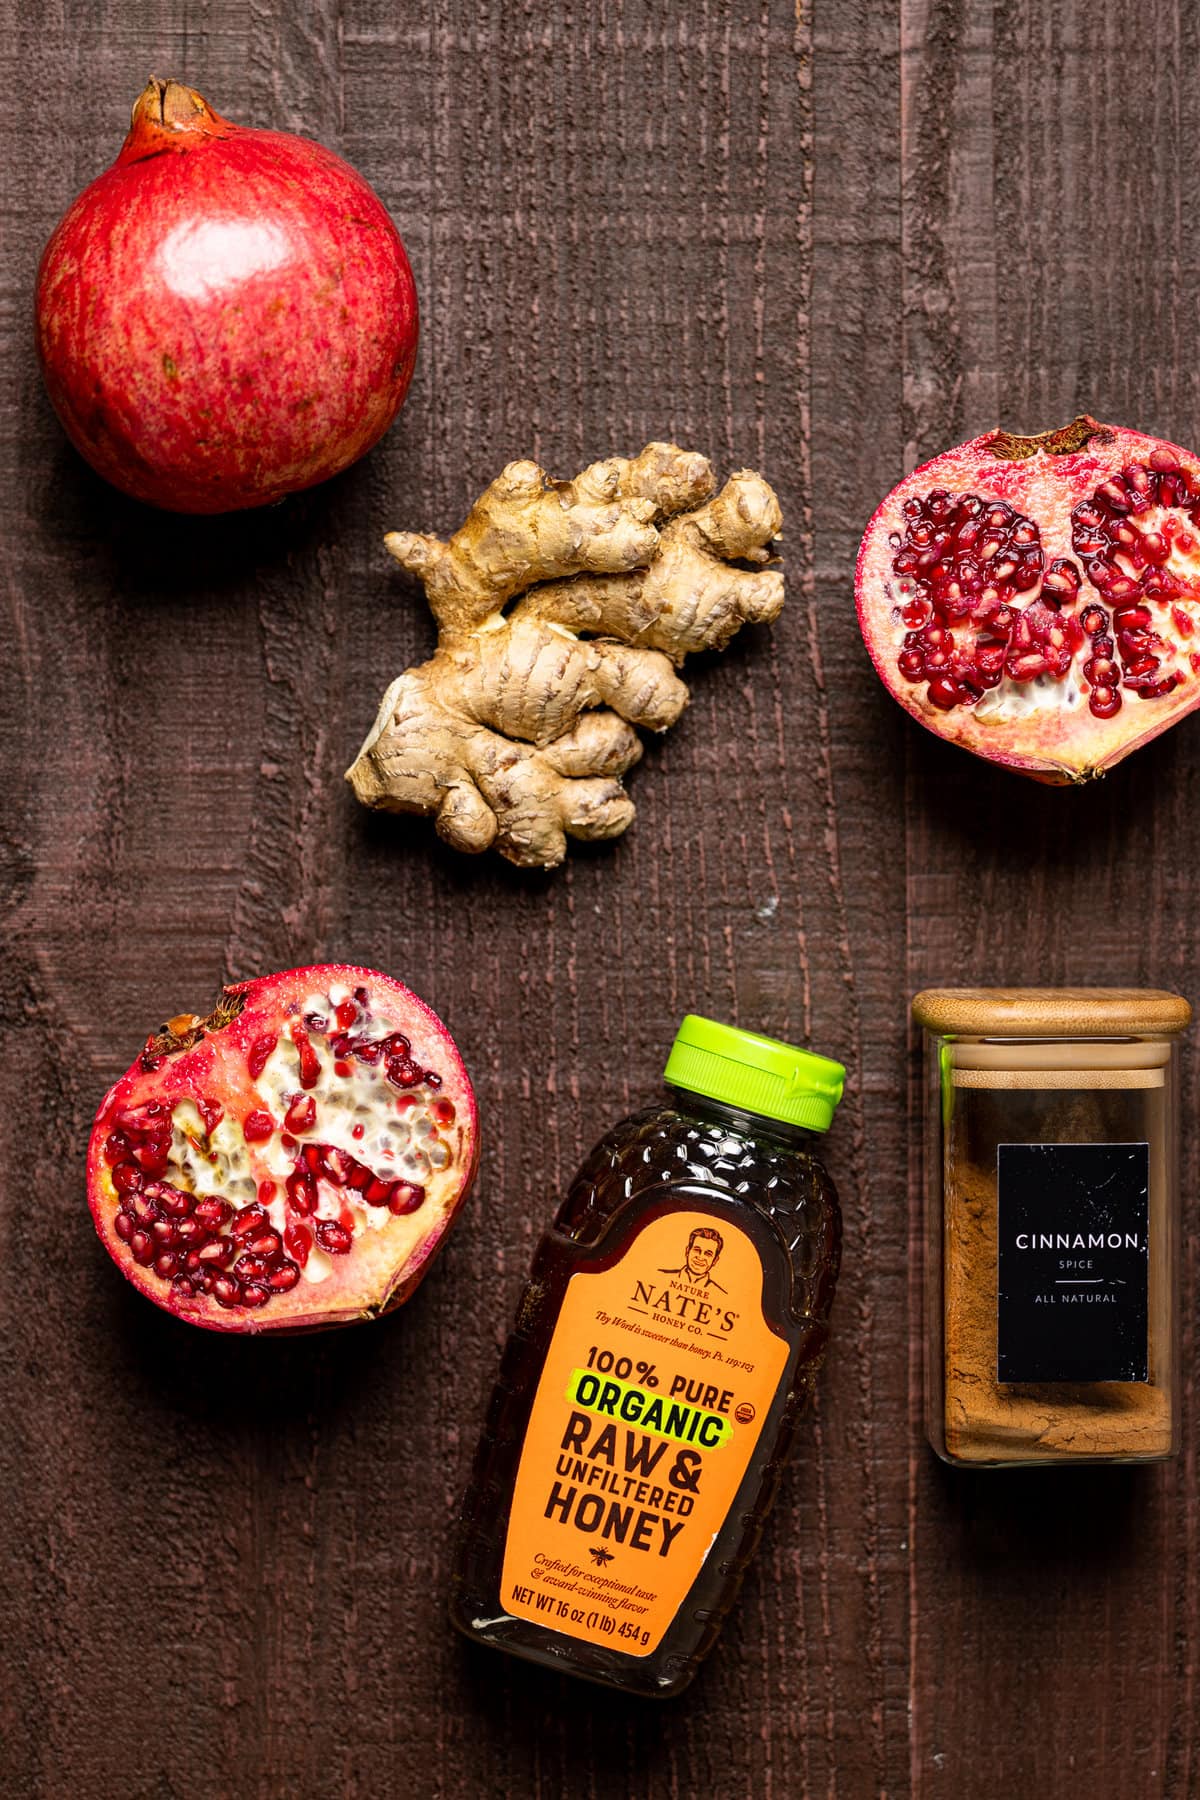 Ingredients for Holiday Pomegranate Ginger Mocktail including honey, cinnamon, and pomegranates